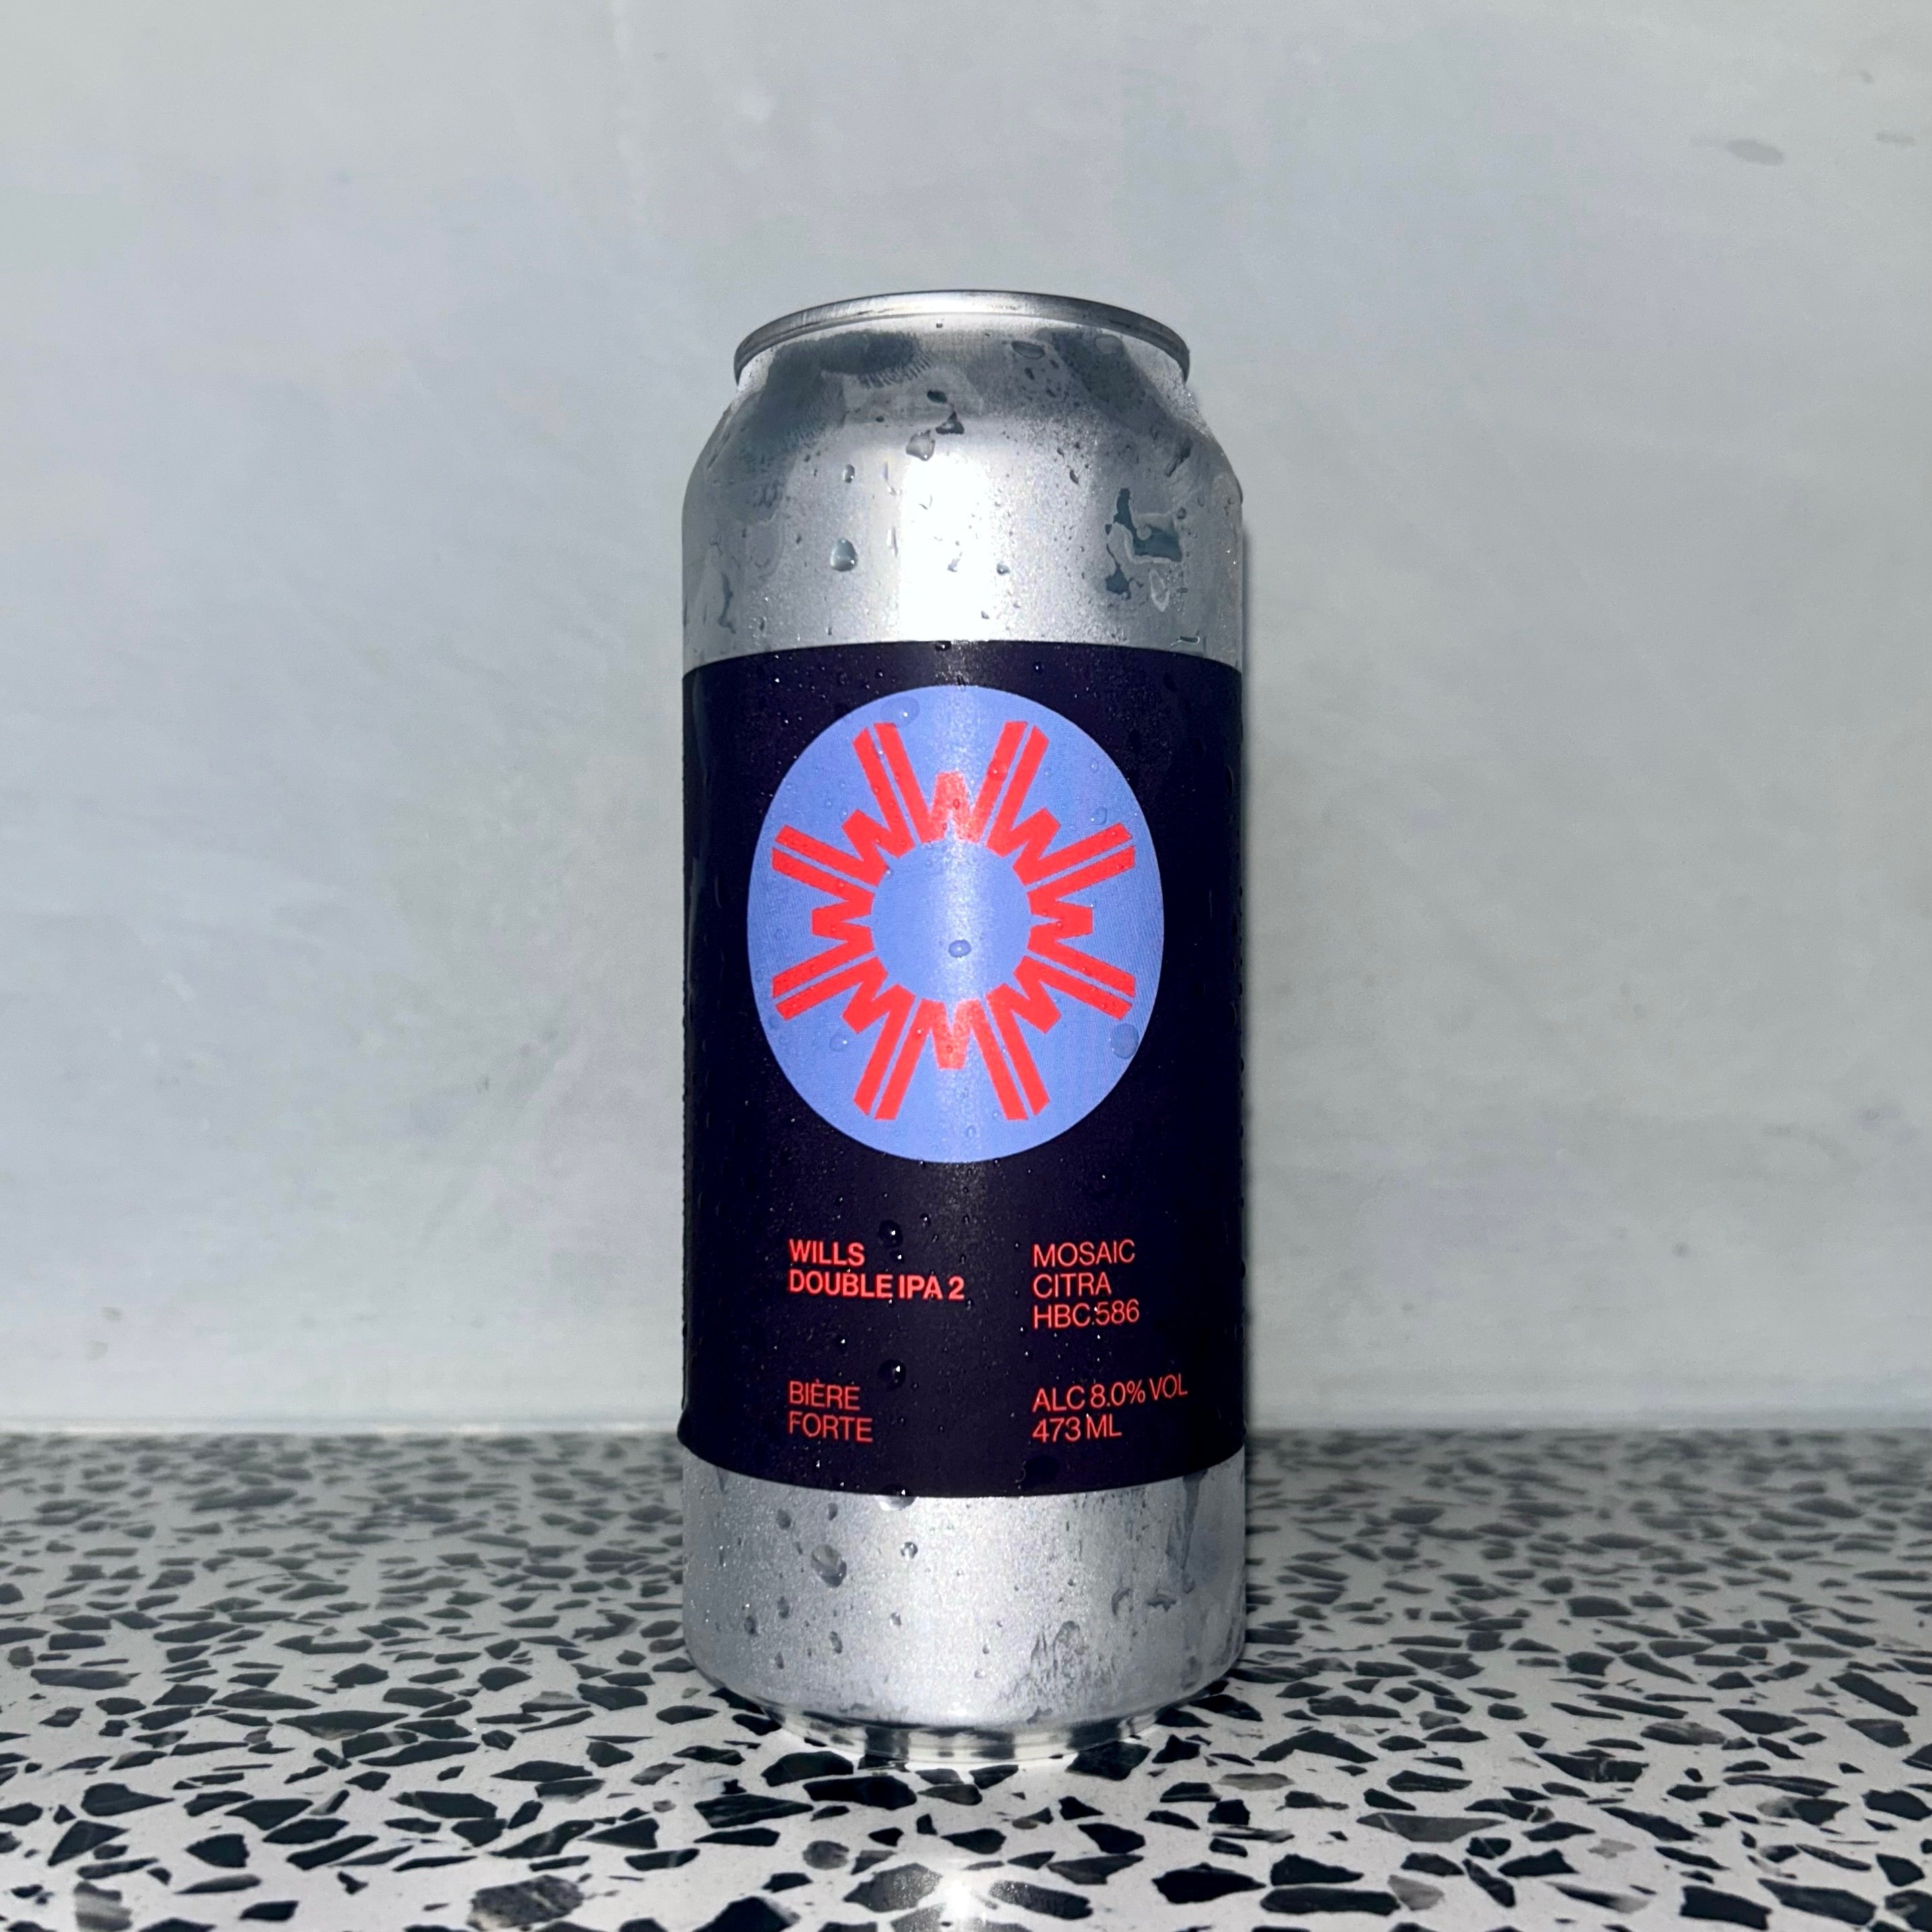 Double IPA 2 can front featuring Mosaic, Citra, and HBC 586 hops, showcasing a blend of fruity, floral, and tropical flavours at WILLS Brewery & Bar